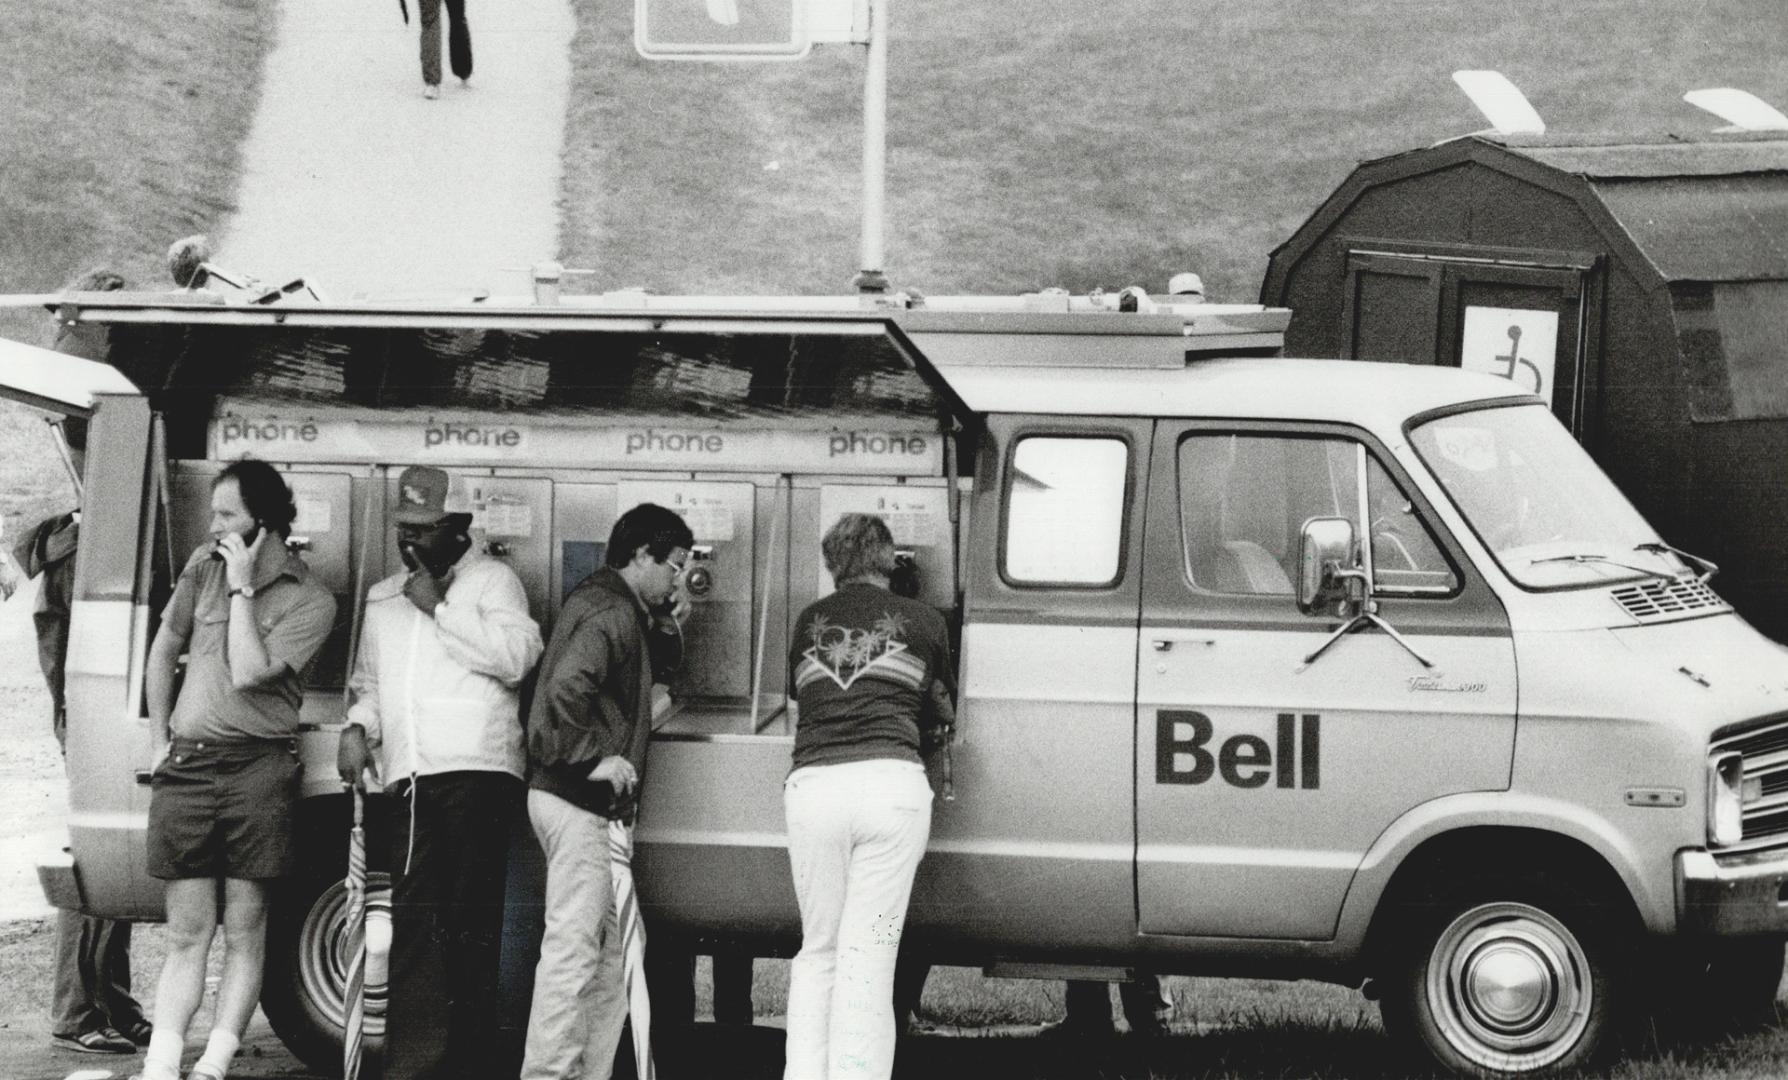 Bell telephone thinks of everything - including portable phone booths for Open spectators